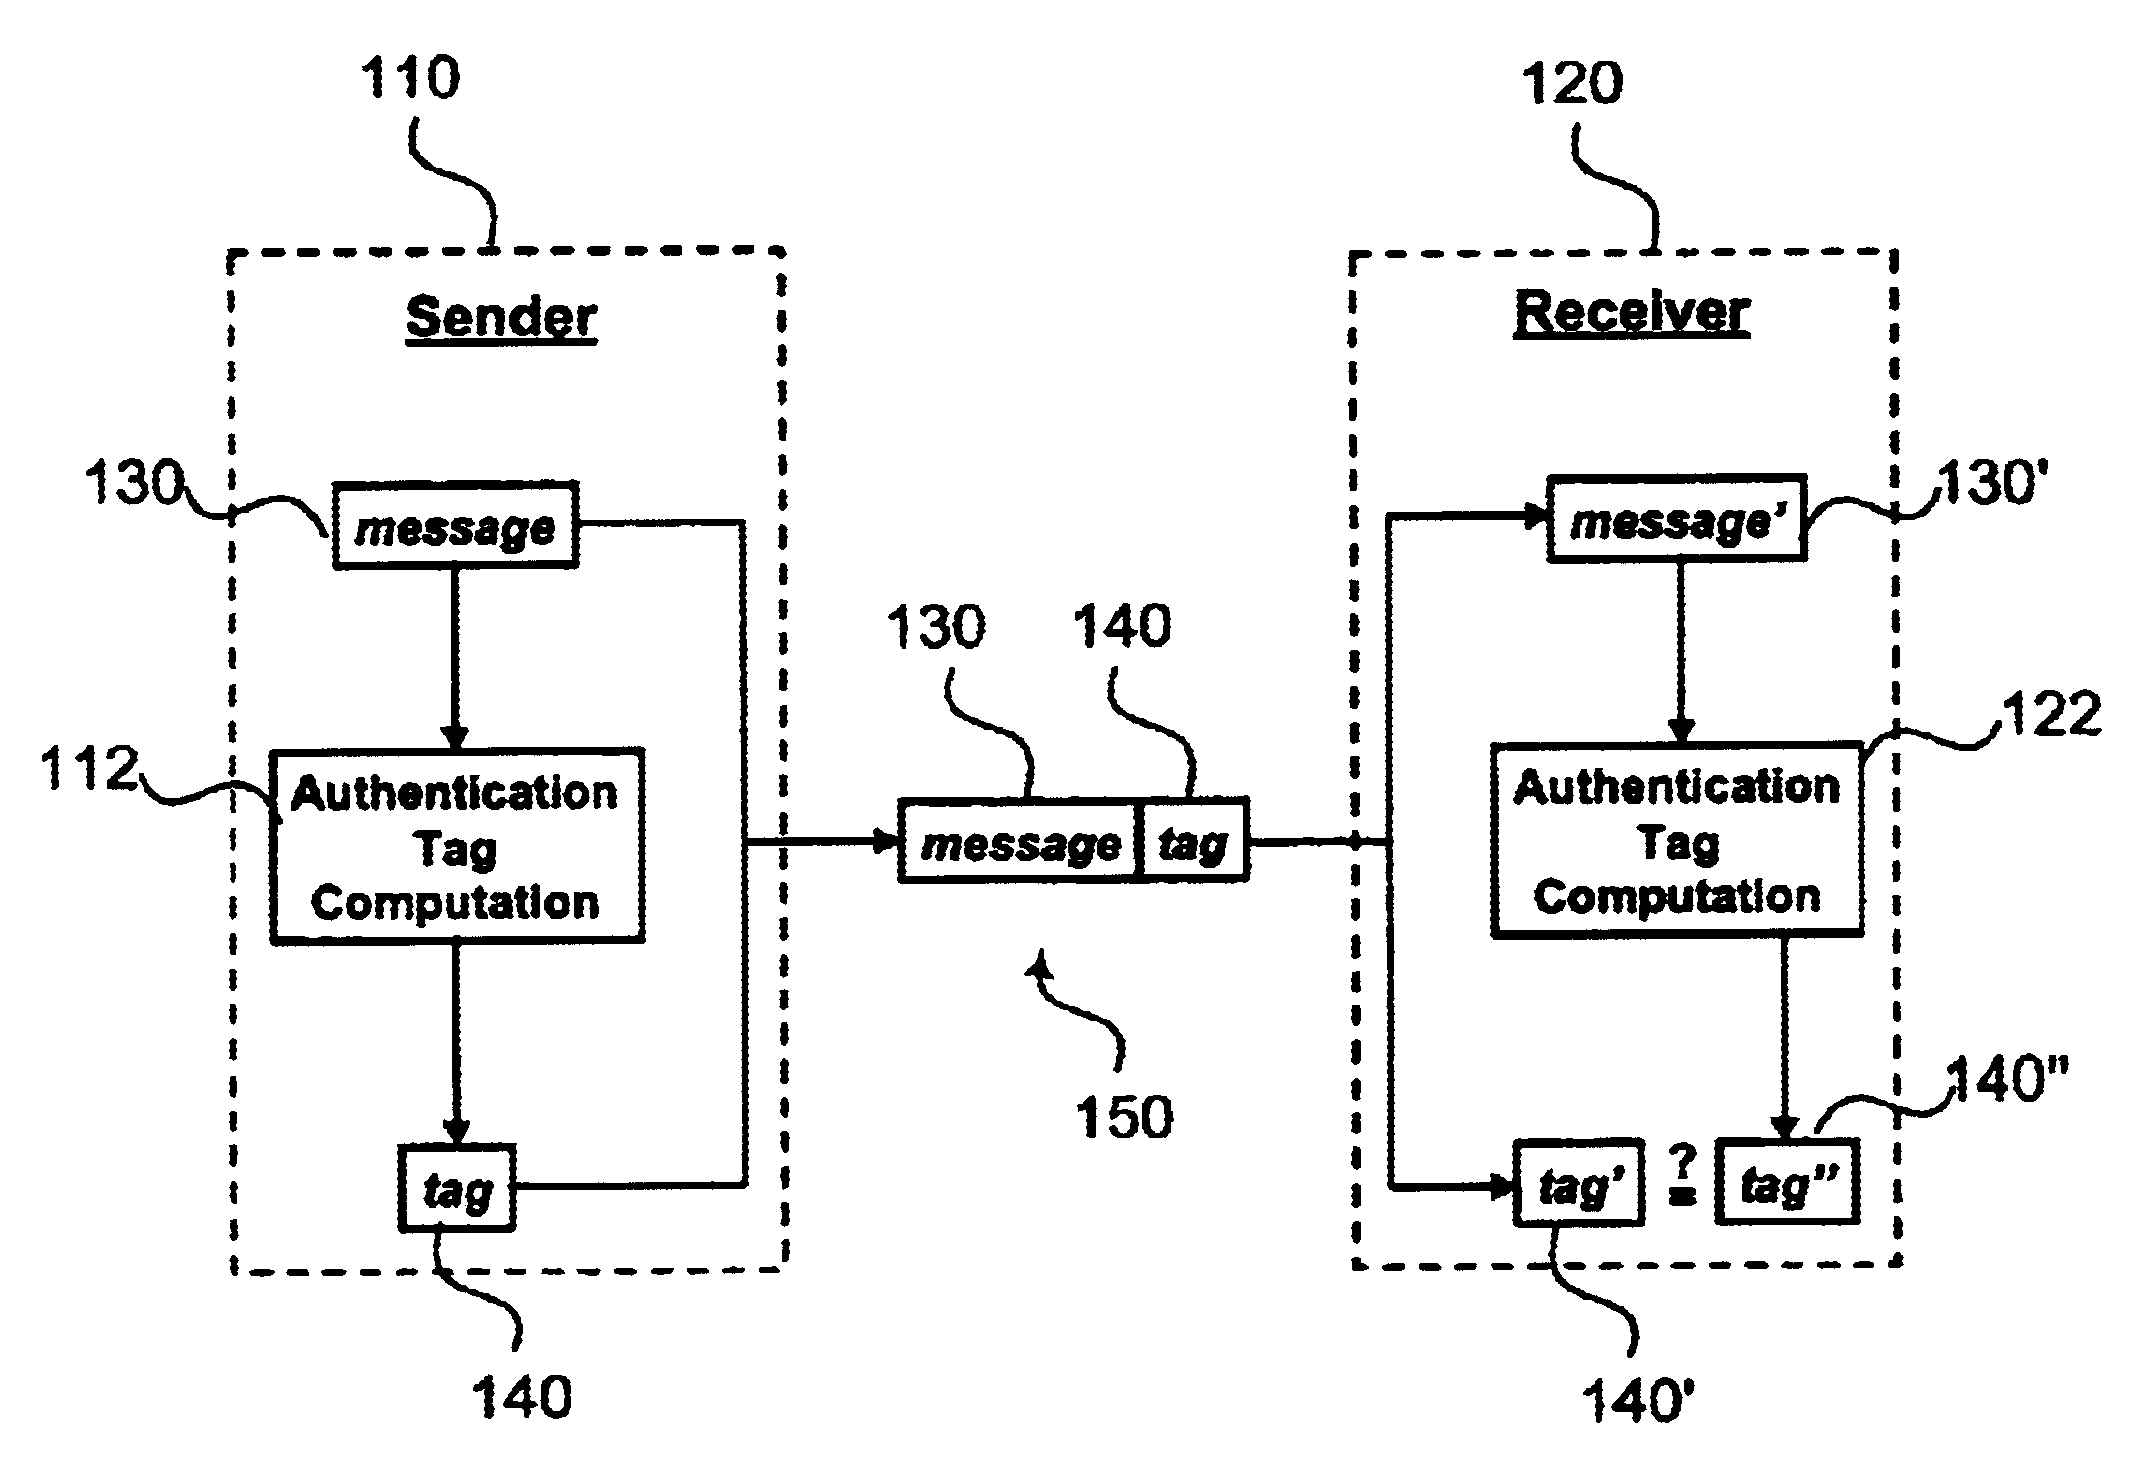 System and method for enabling authentication at different authentication strength-performance levels